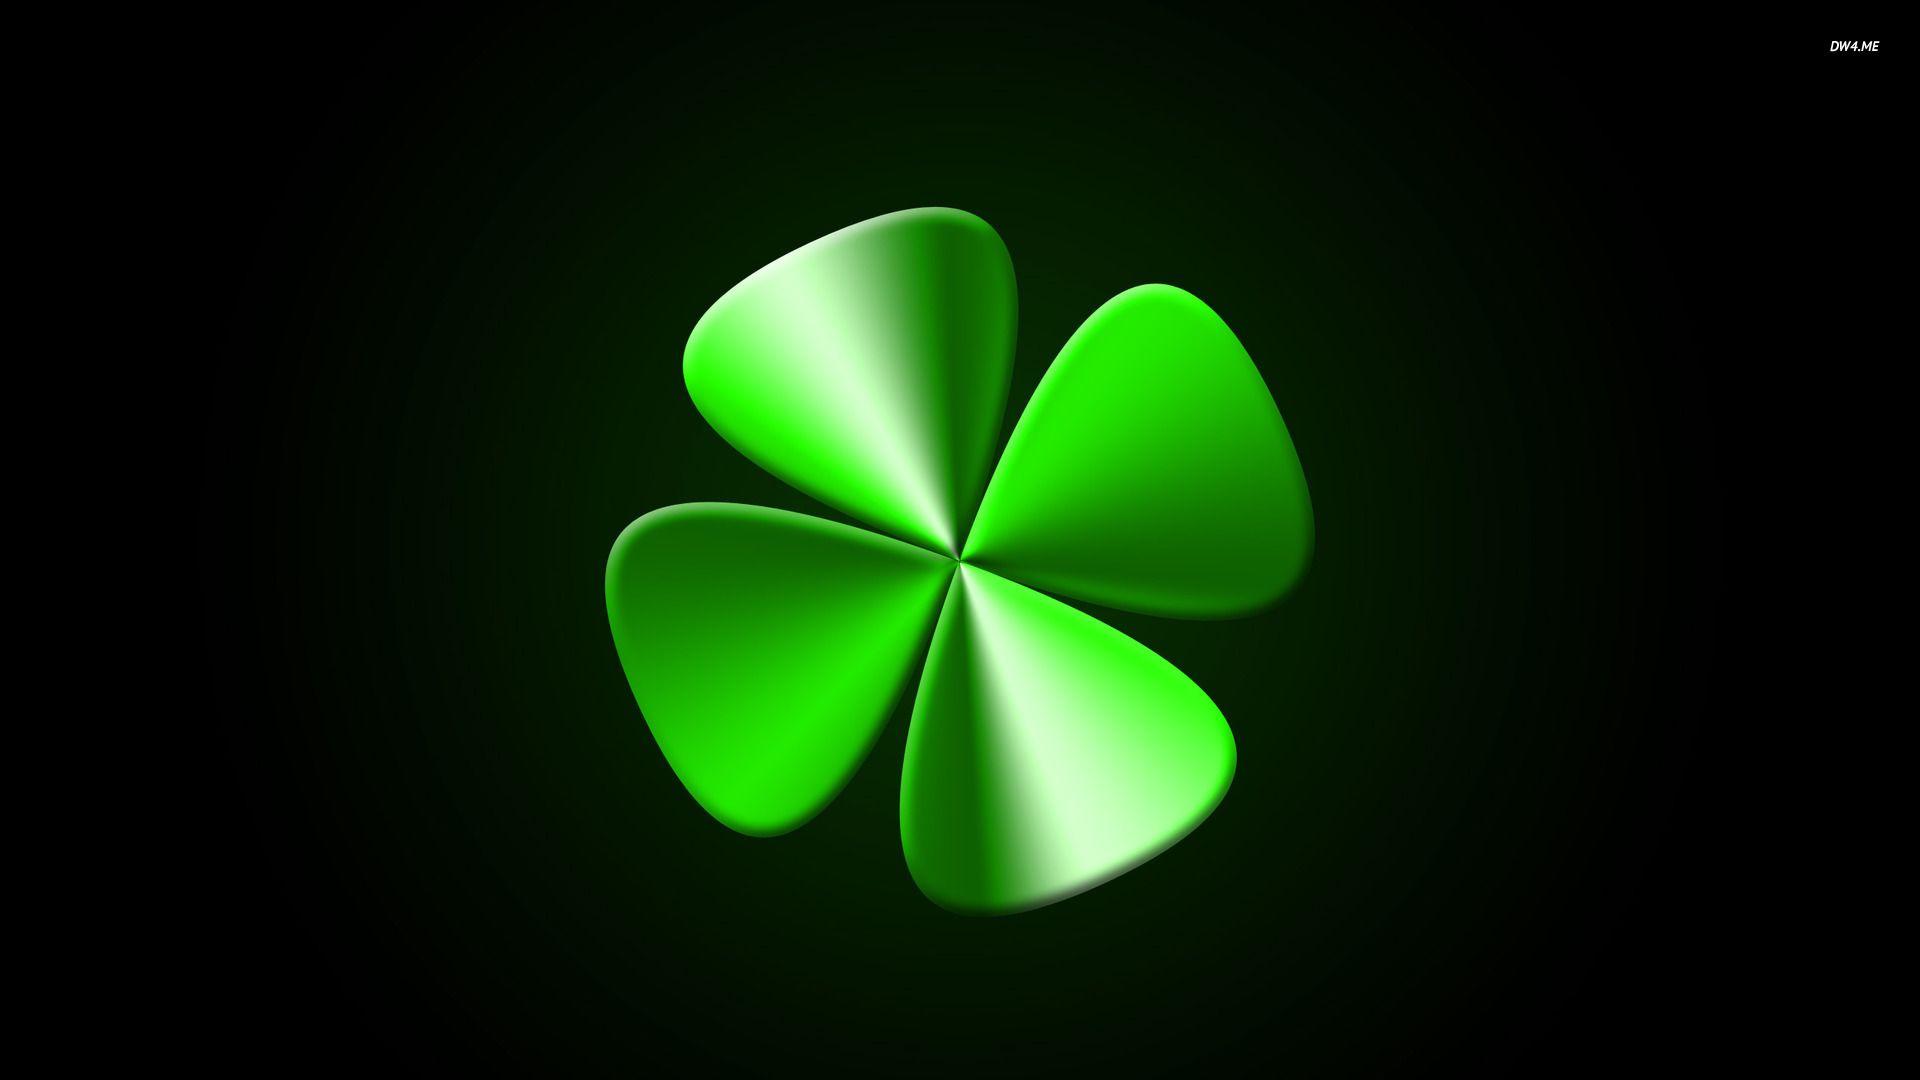 Two units three leaf clover minimalistic on the soft green bacground 2K  wallpaper download